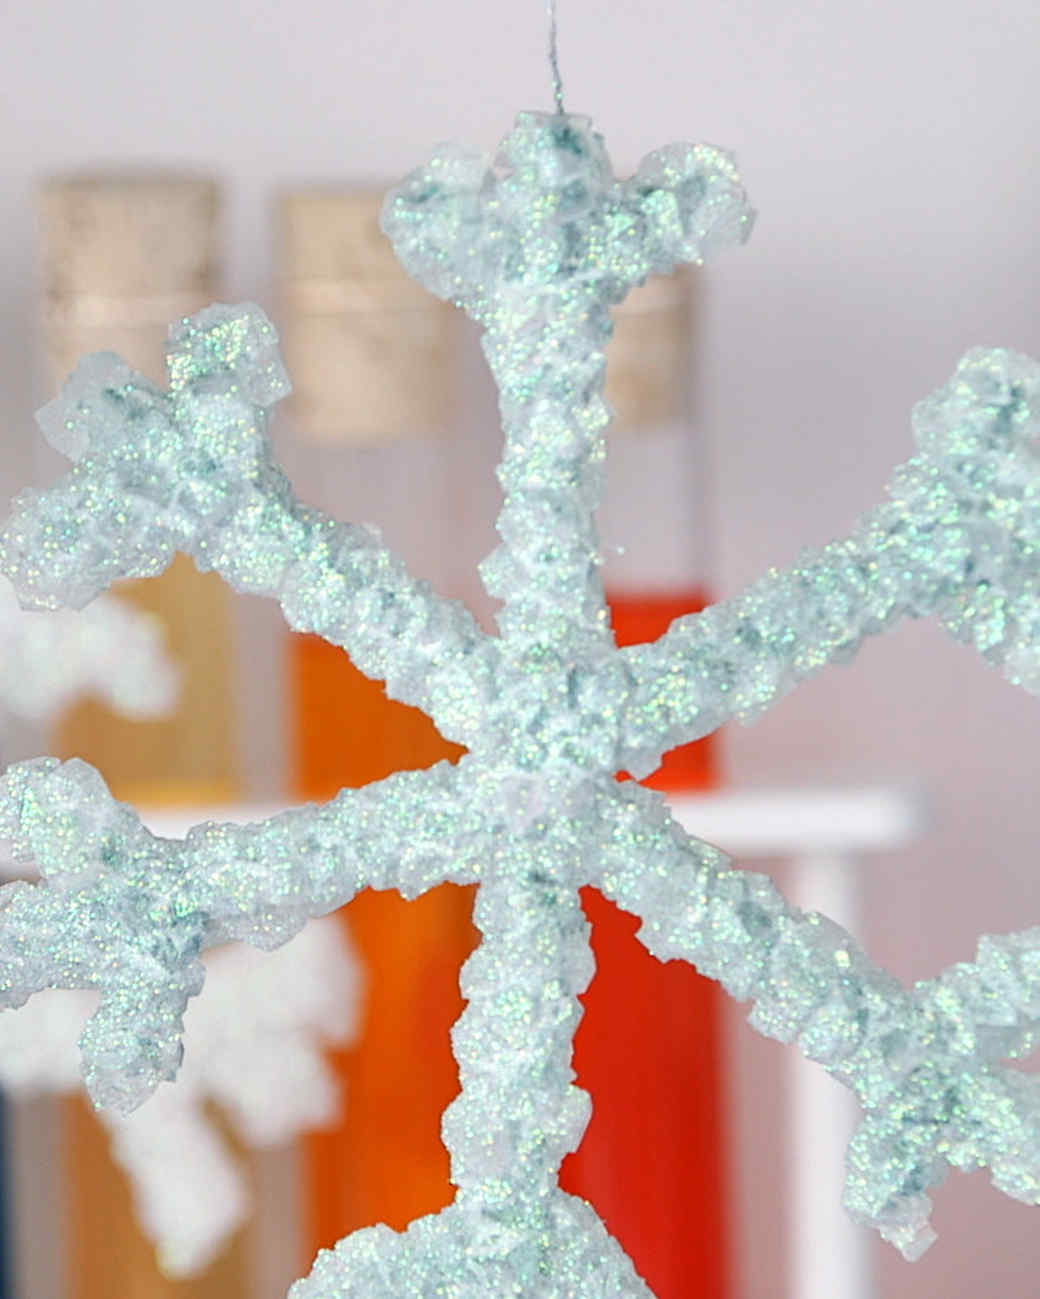 how to make borax crystals without pipe cleaners